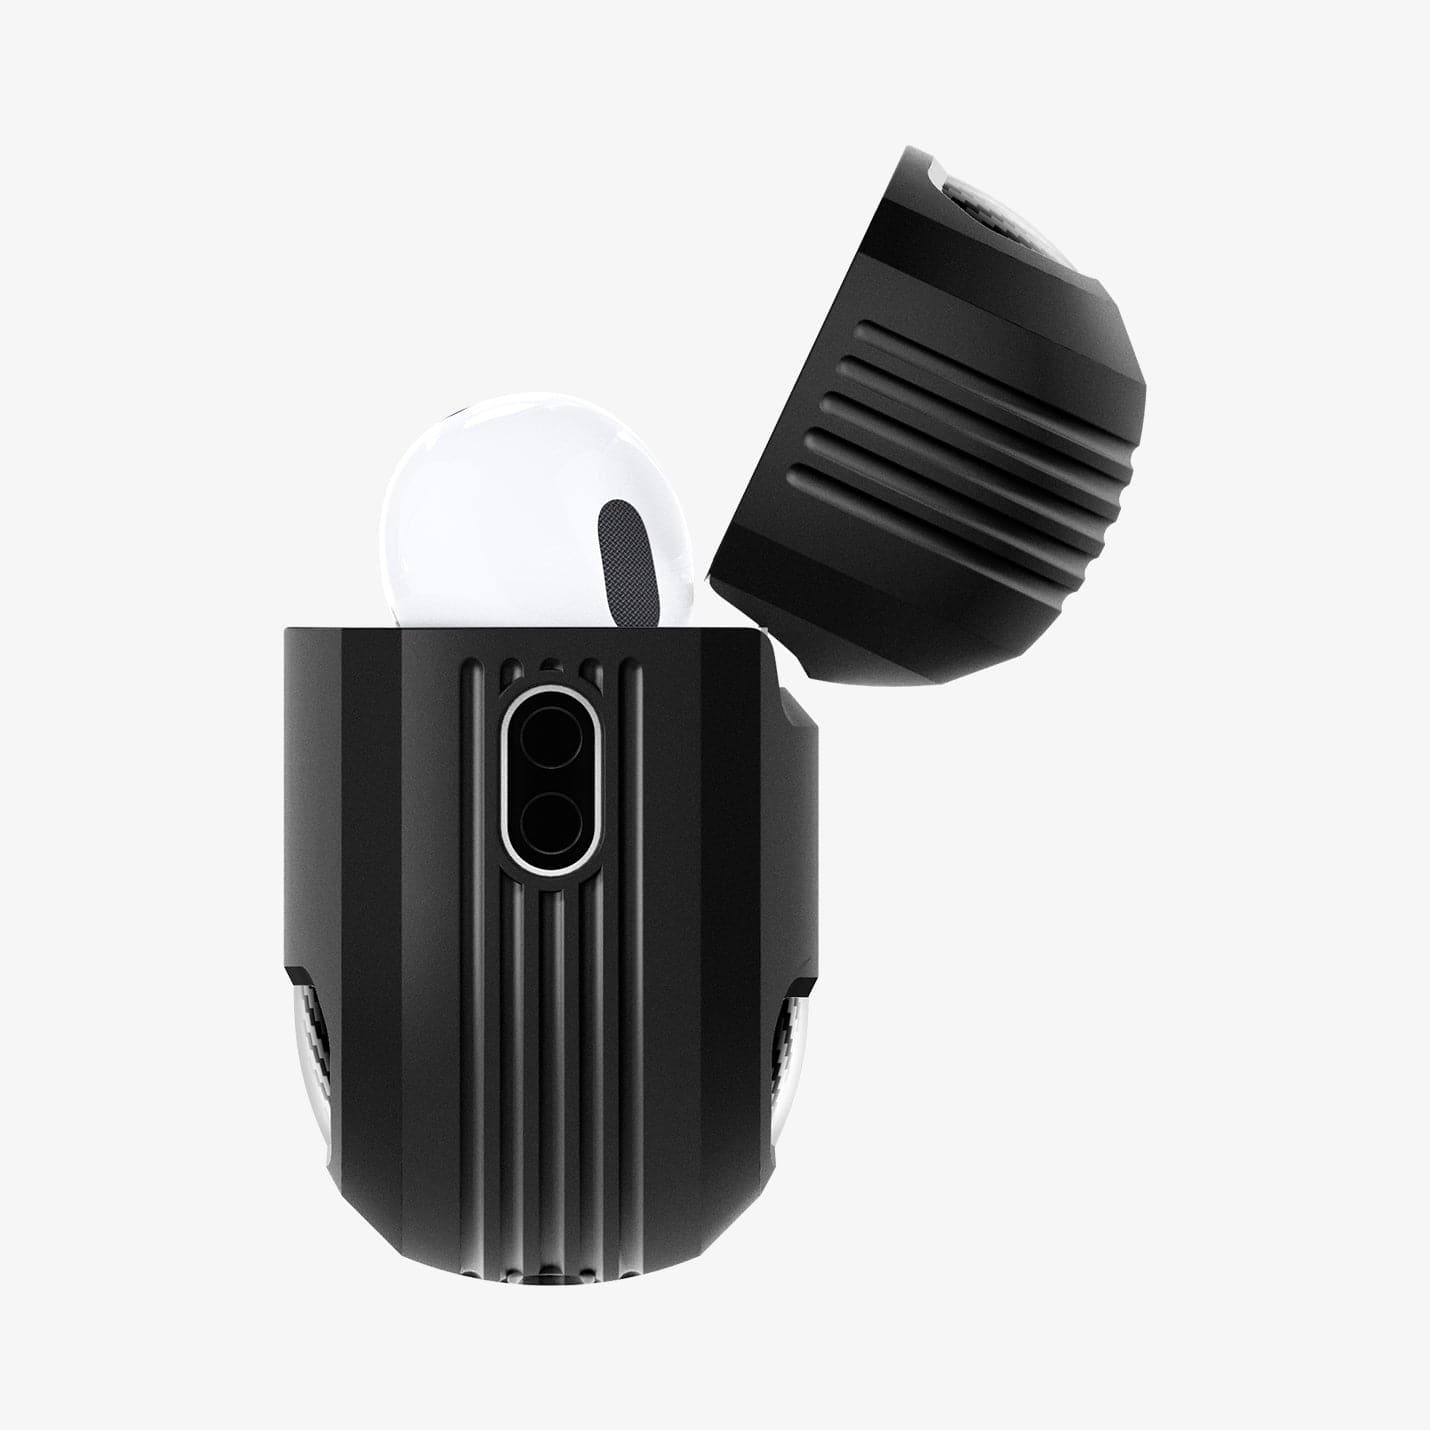 ACS05482 - Apple AirPods Pro 2 Case Rugged Armor in matte black showing the side with top open and AirPods inside